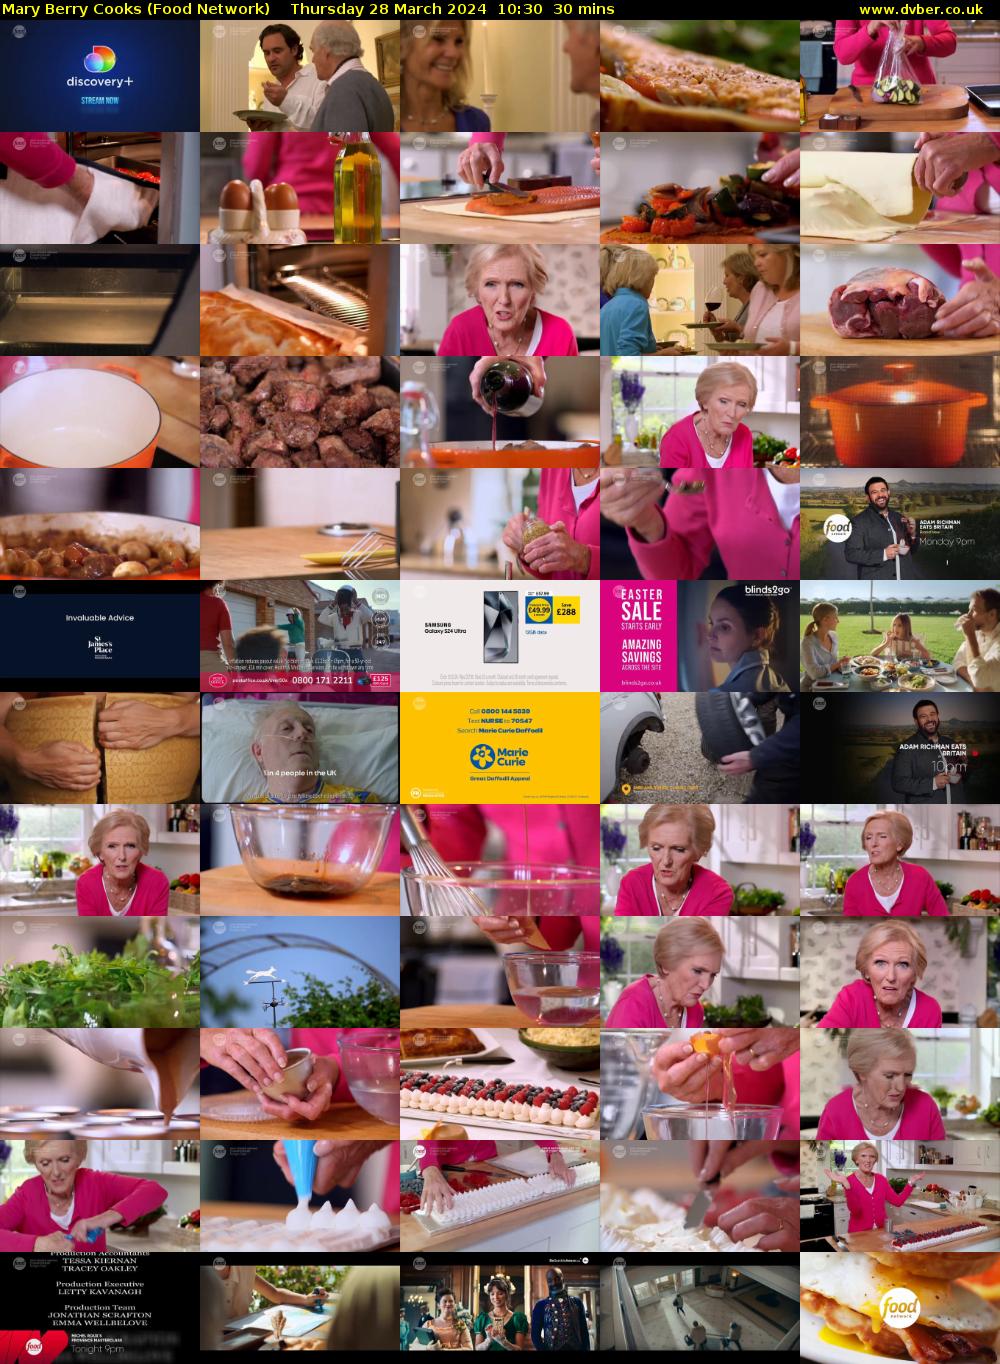 Mary Berry Cooks (Food Network) Thursday 28 March 2024 10:30 - 11:00